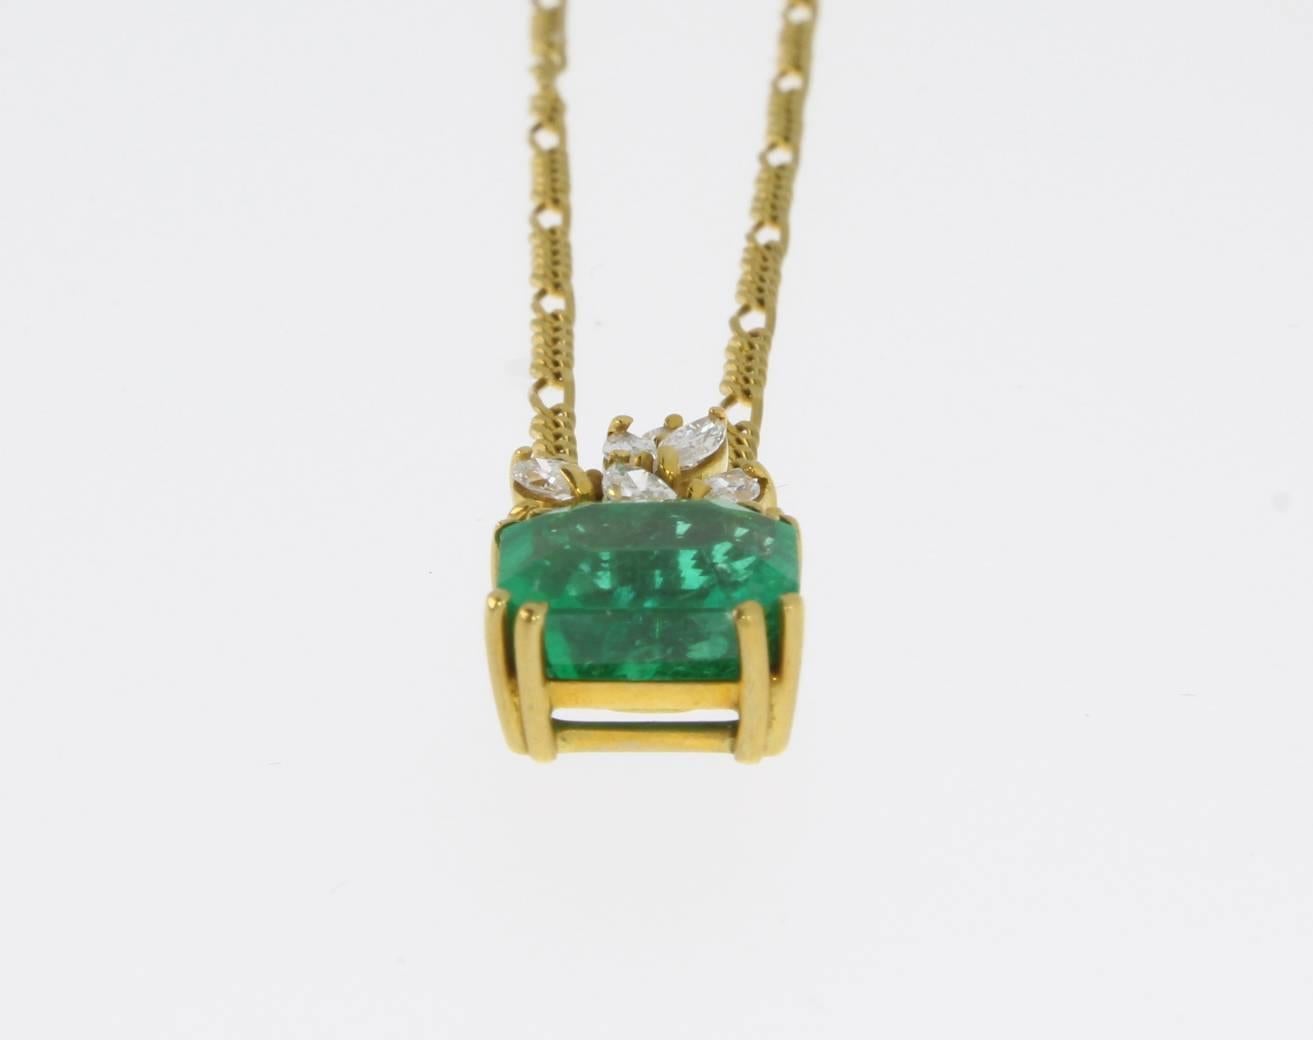 Europe, 1960's. Set with large Colombian emerald weighing circa 5,2 ct. Decorated by 9 navette-cut diamonds weighing ca. 1,2 ct. Mounted in 18 carat yellow gold. Hallmarked on the back with the purity 750.  
Total weight: 8,37 grams. Dimensions: